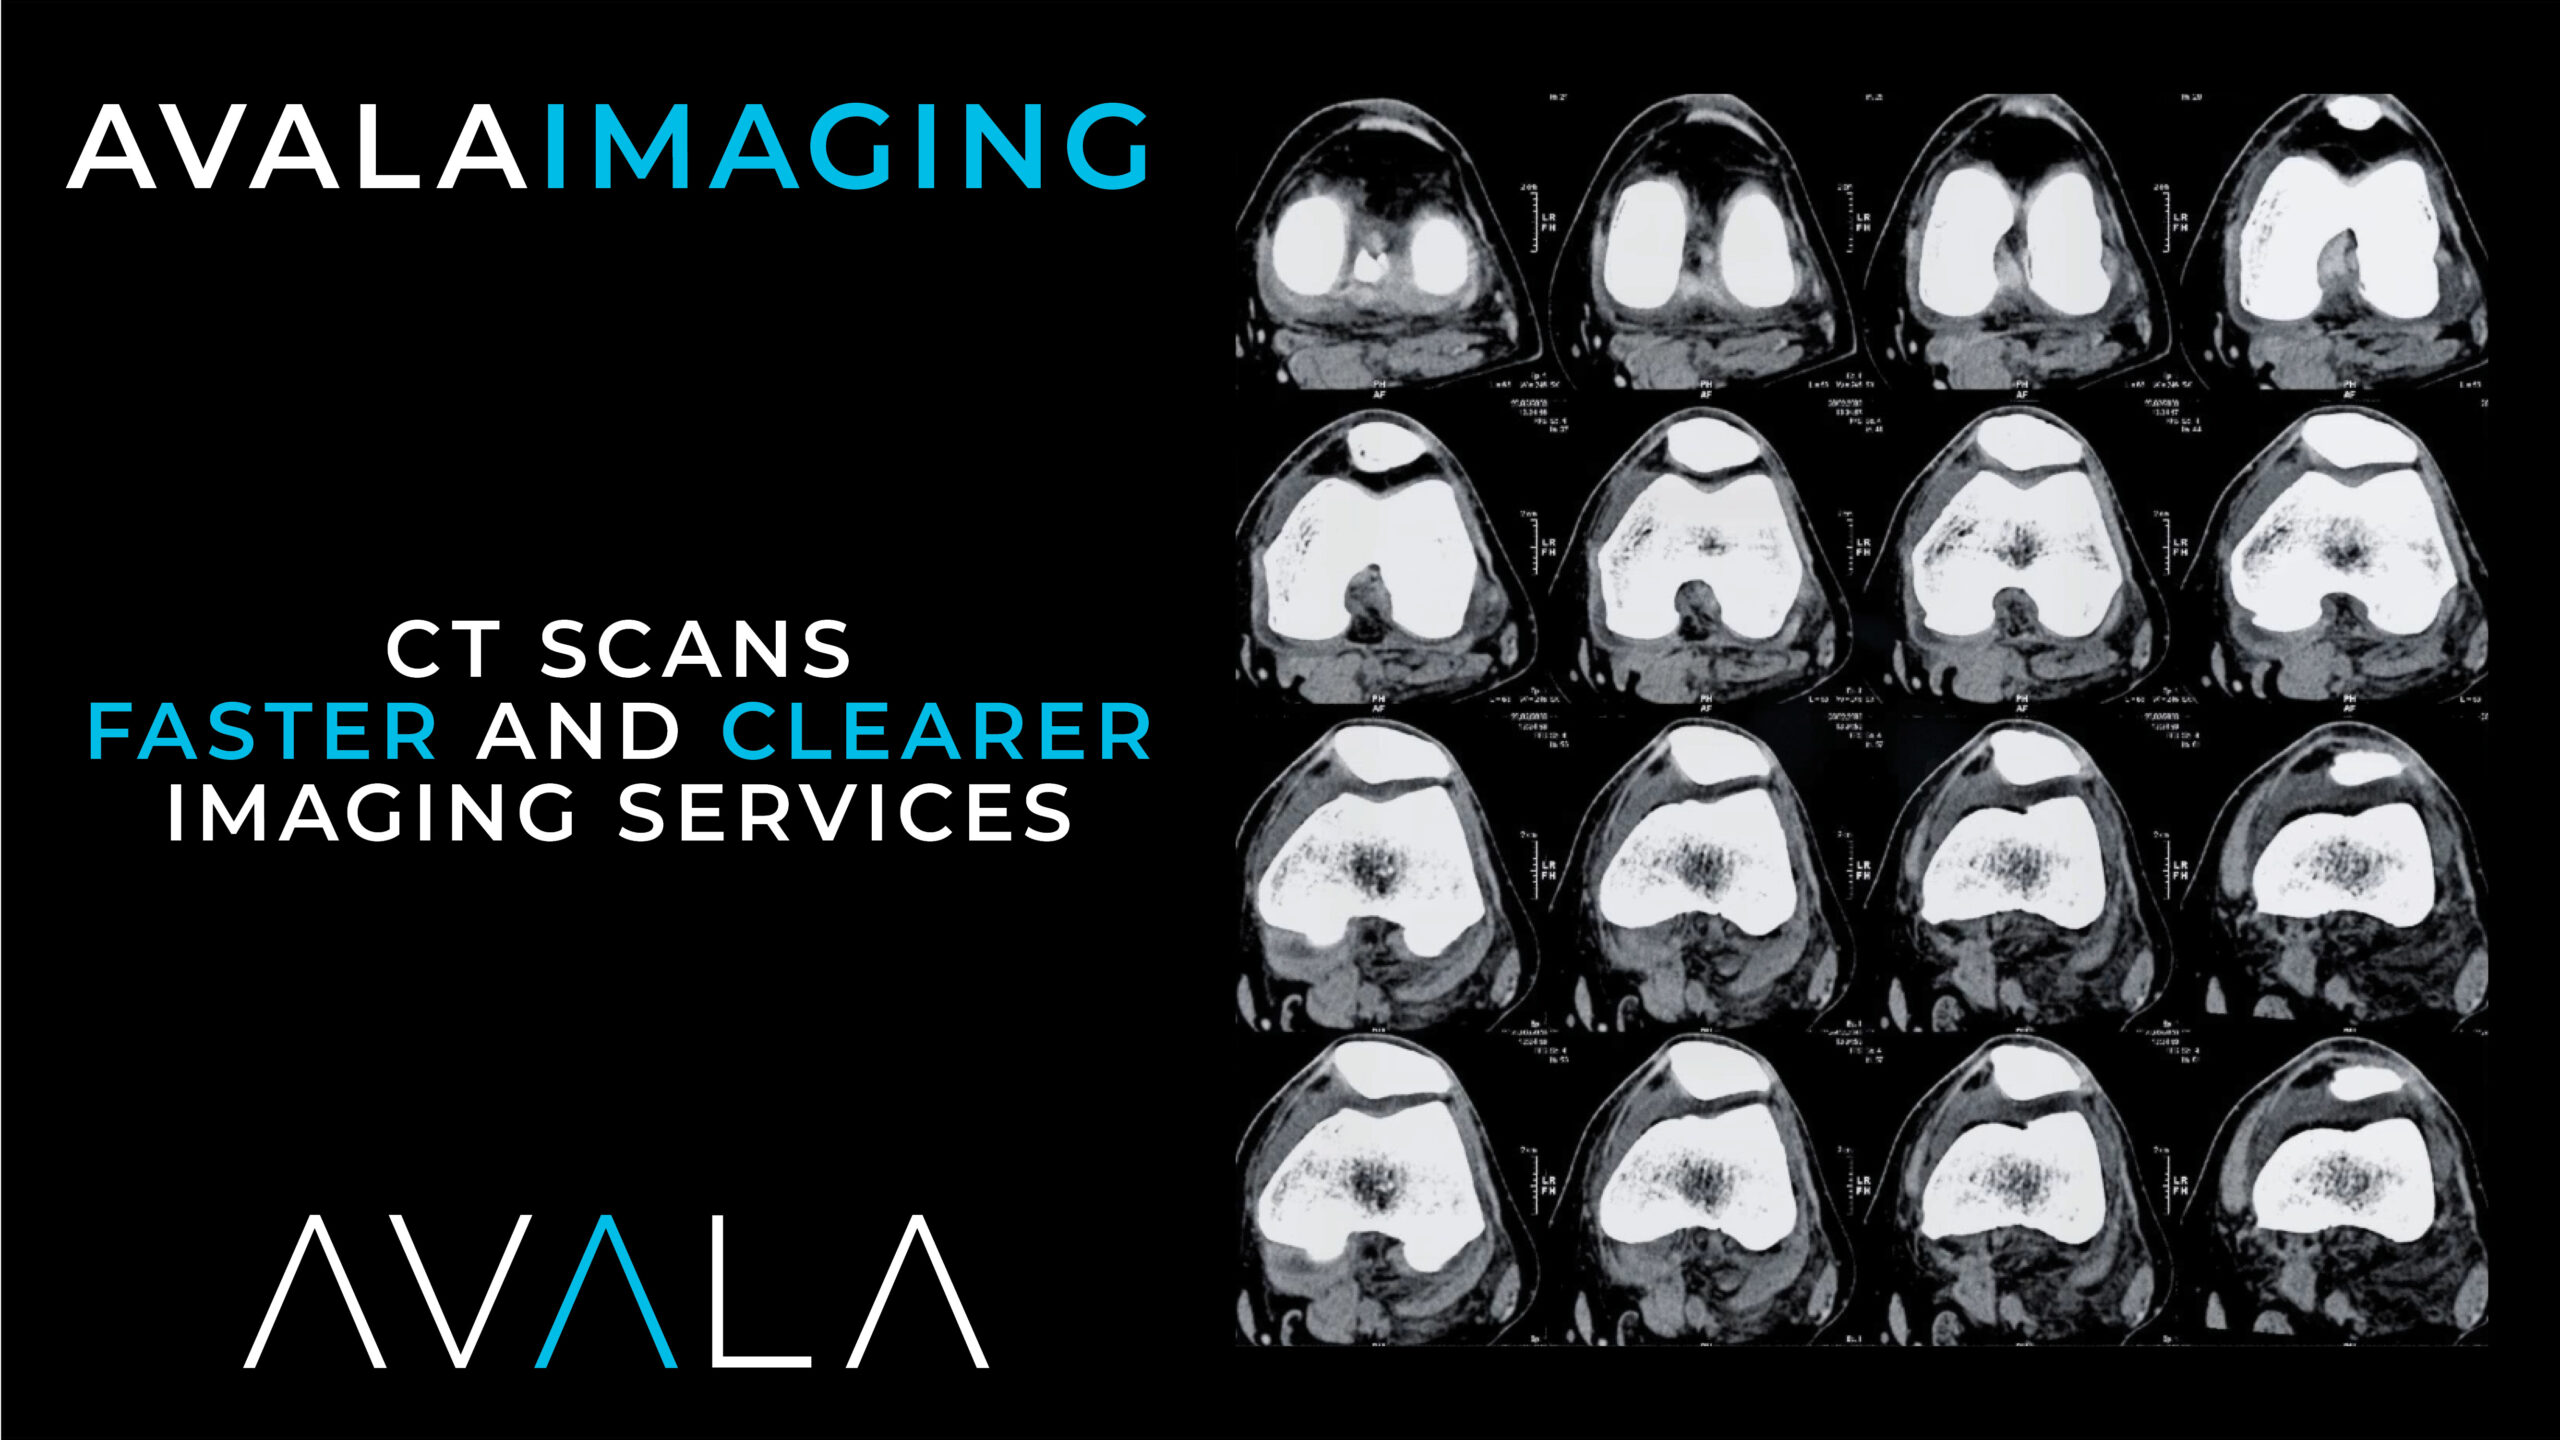 CT Scan - Faster and Clearer Imaging